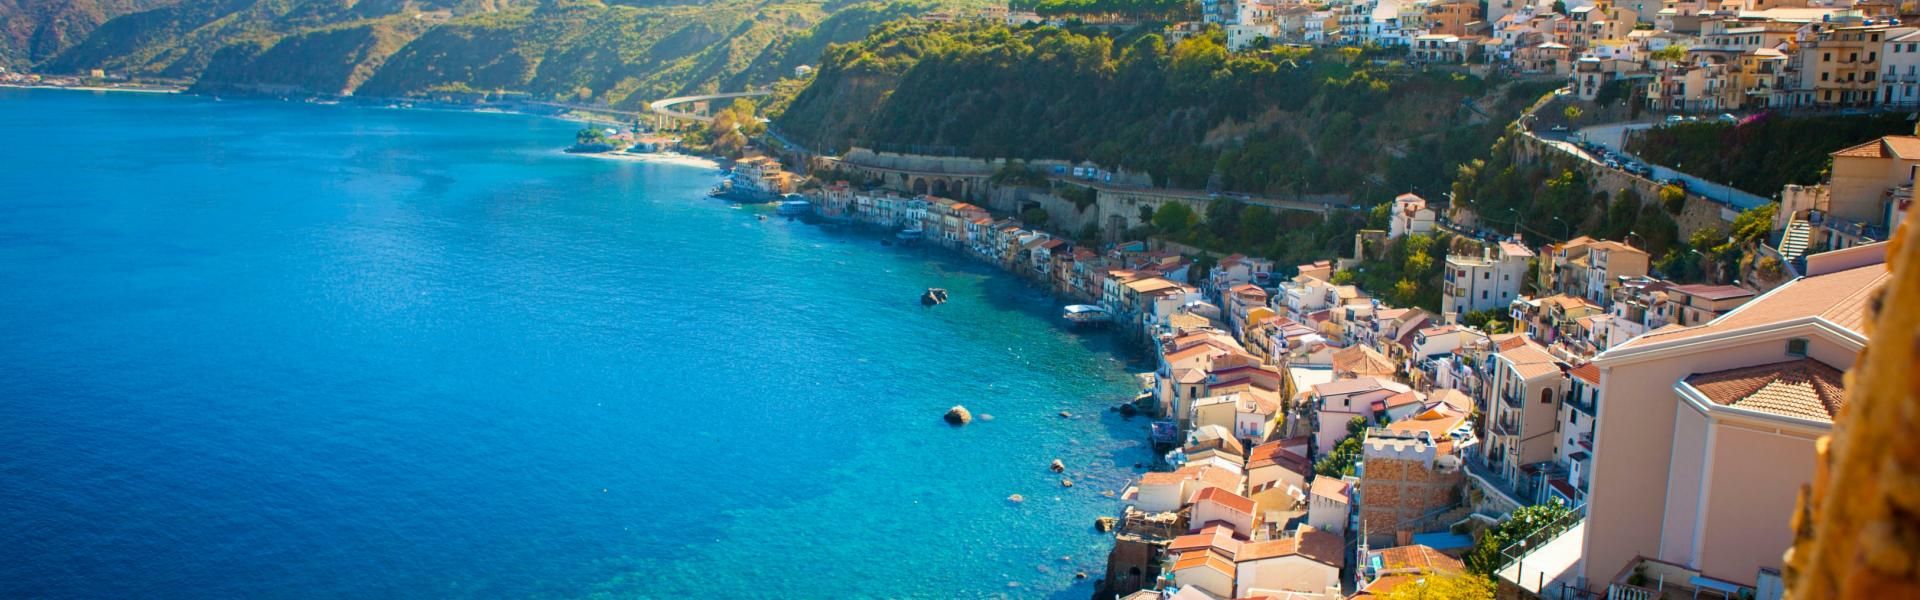 Find the ideal holiday home in Calabria for your Italian adventure - Casamundo